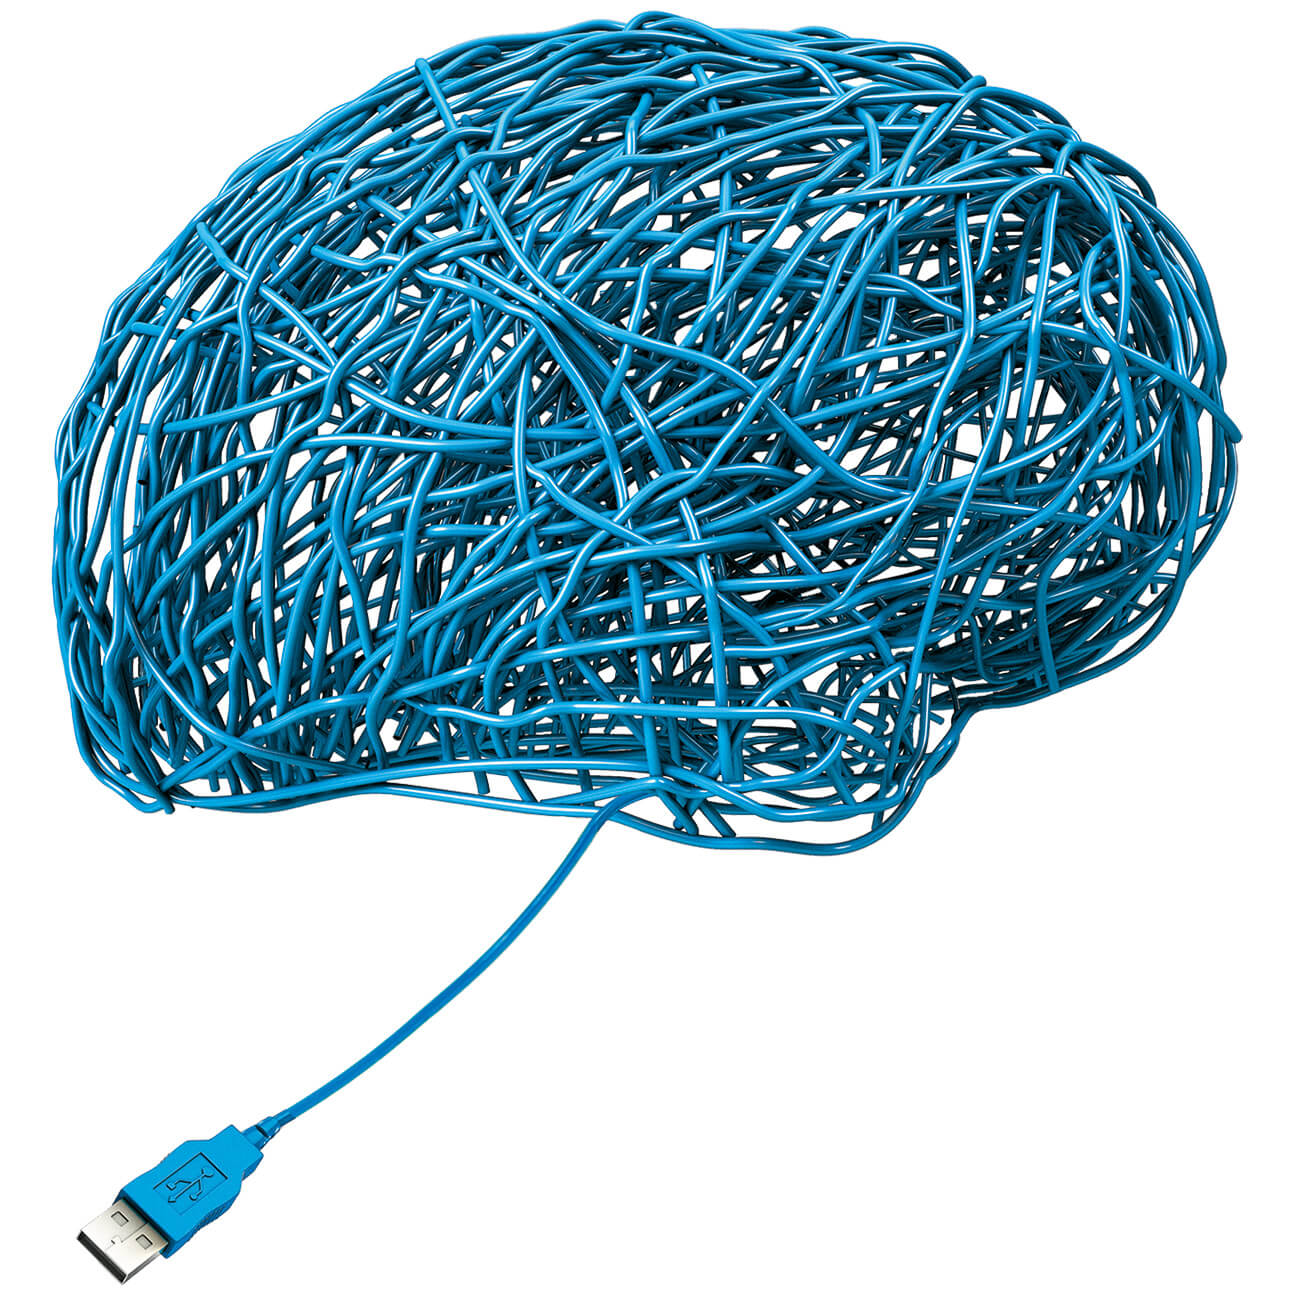 Algorithms to Live By. Illustration of a jumble of USB cable shaped like a human brain.